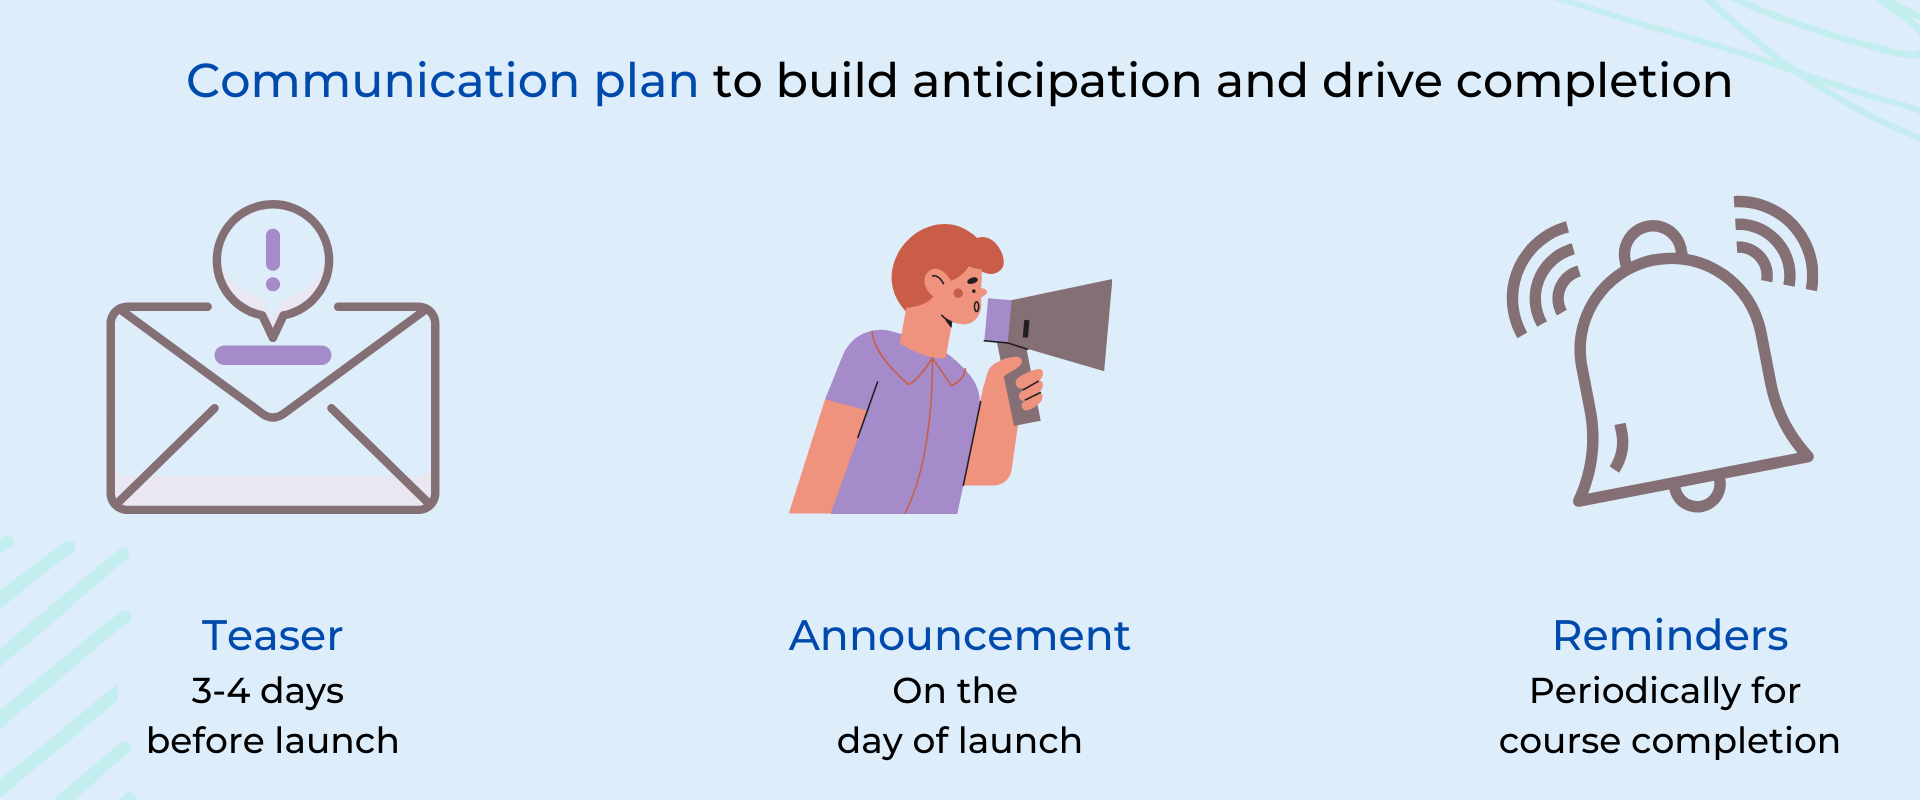 Communication plan to build anticipation and drive completion